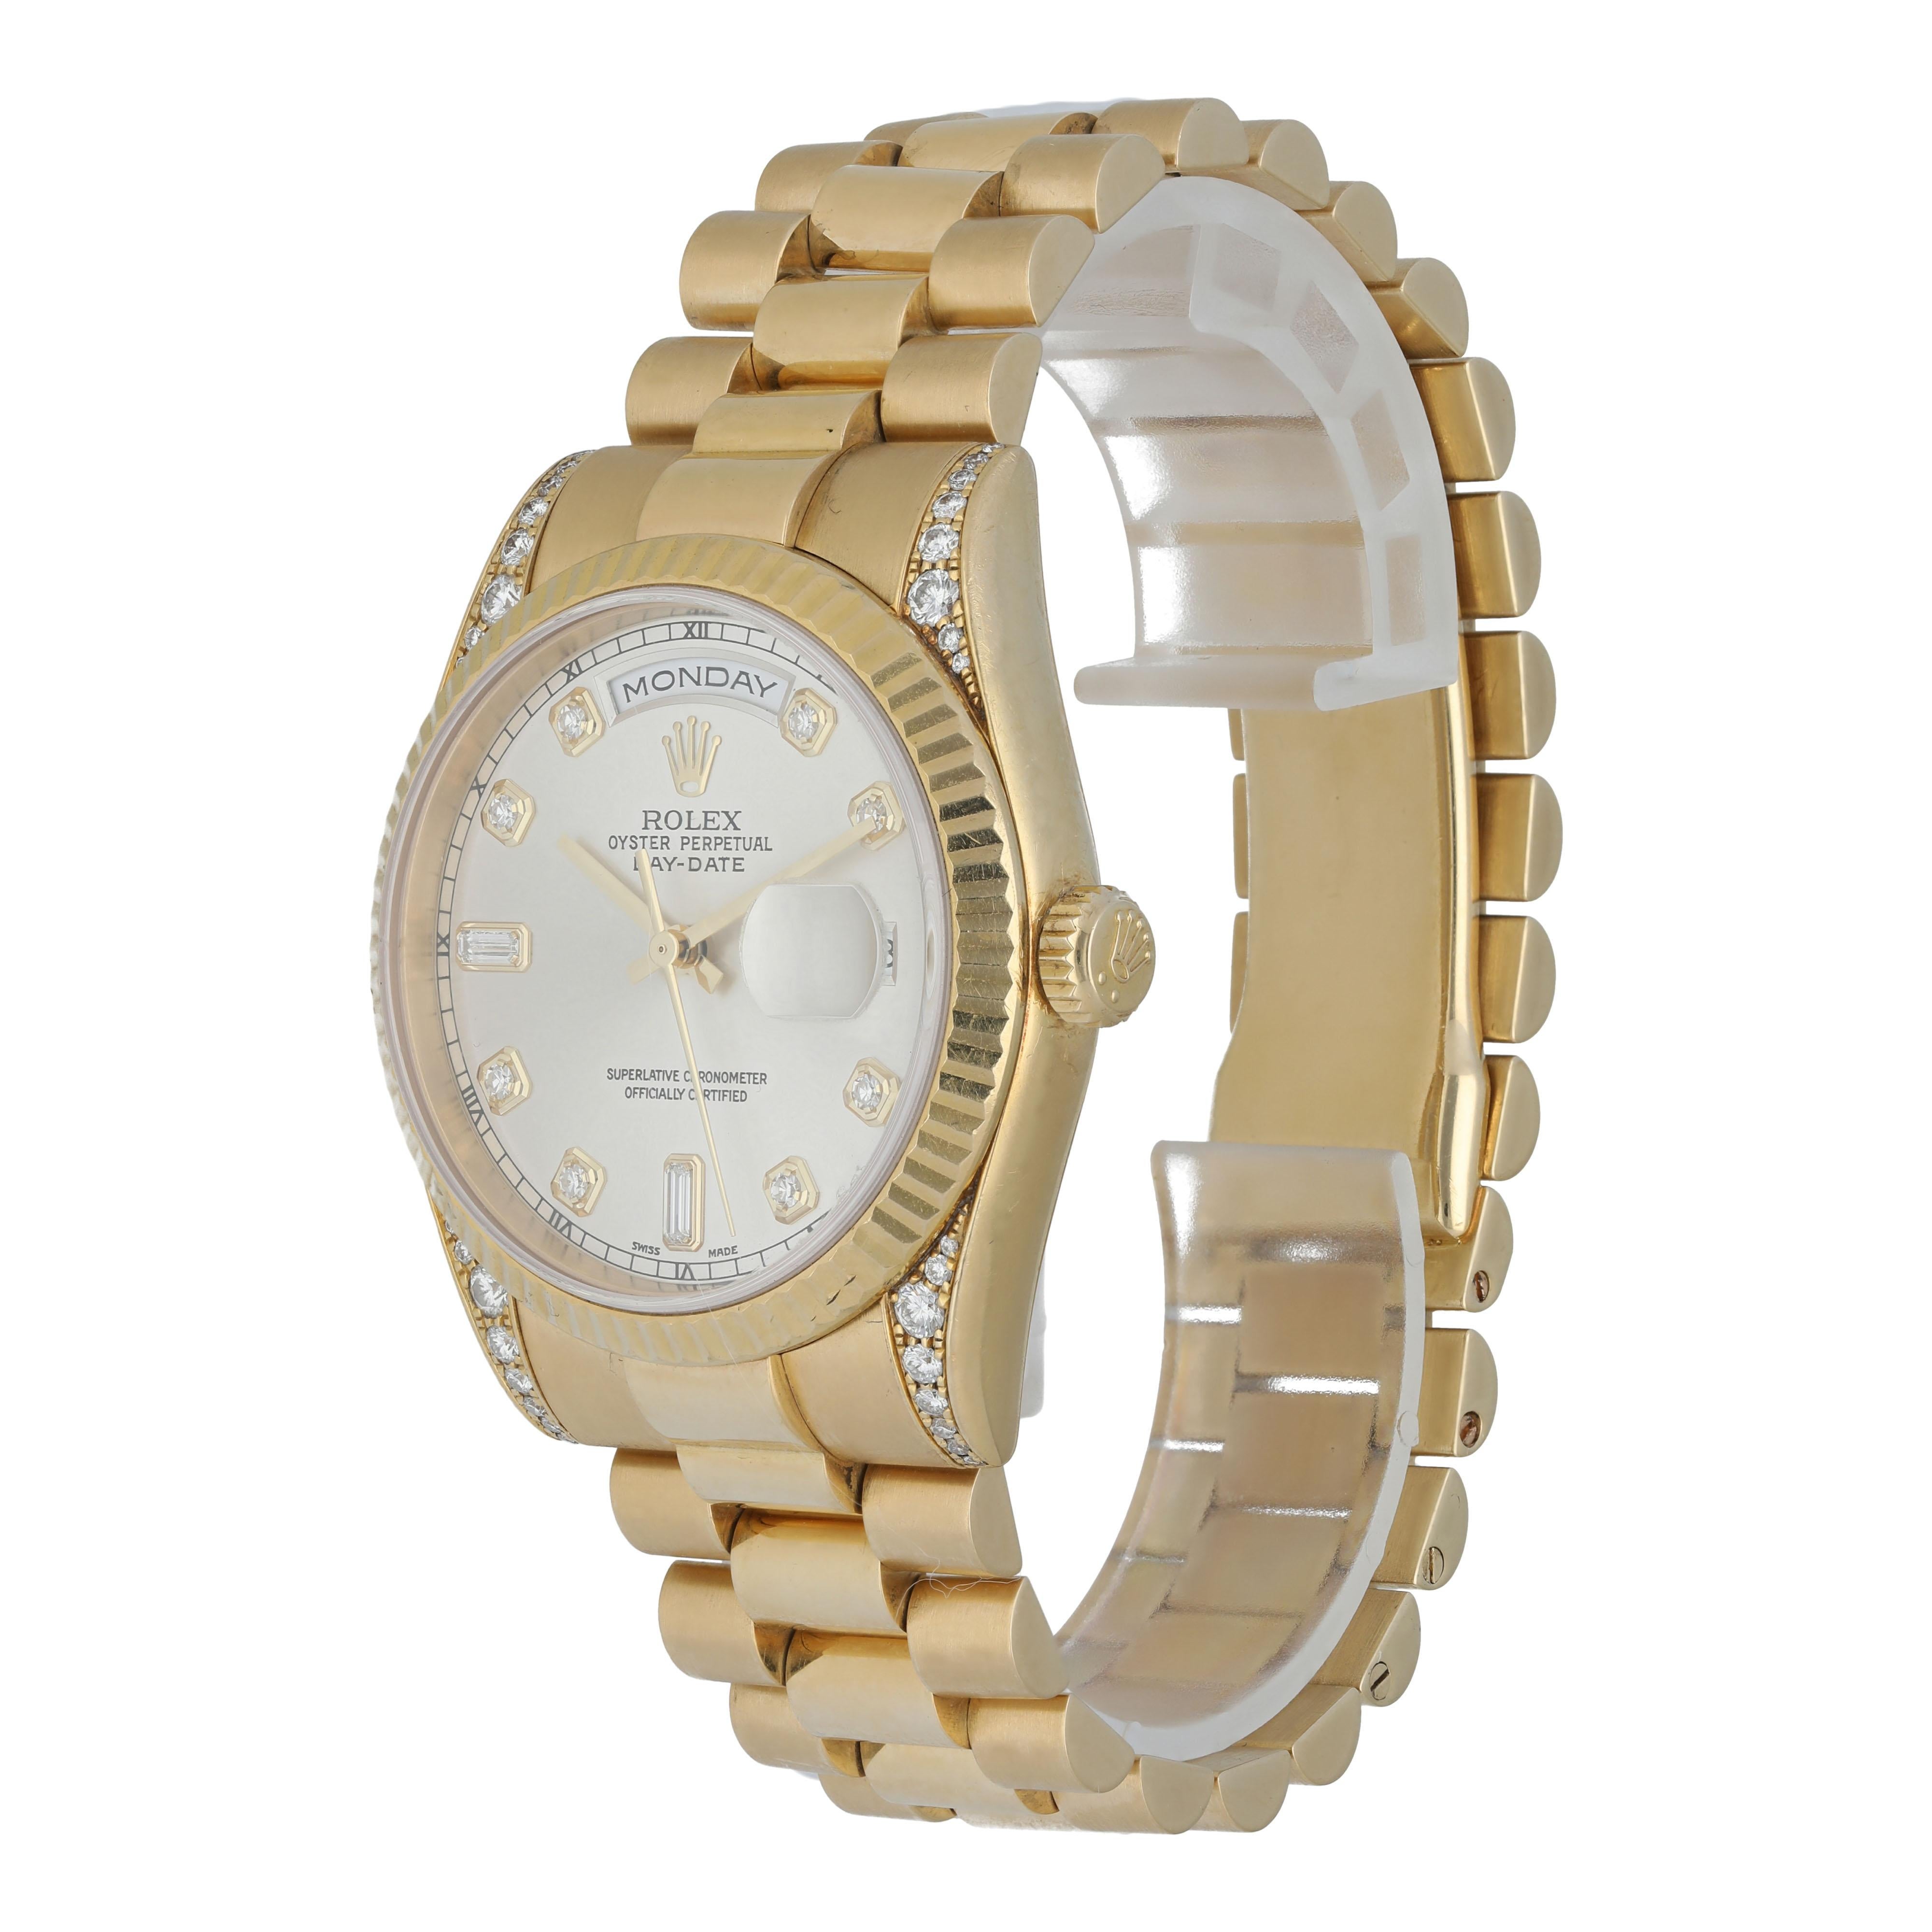 Rolex Day-Date President 118338 Diamond Dial Men's Watch.
36mm 18k Yellow gold case With factory set diamonds. 
Yellow Gold fluted bezel. 
Silver dial with gold hands and factory set diamond hour markers. 
Minute markers on the outer dial. 
Date